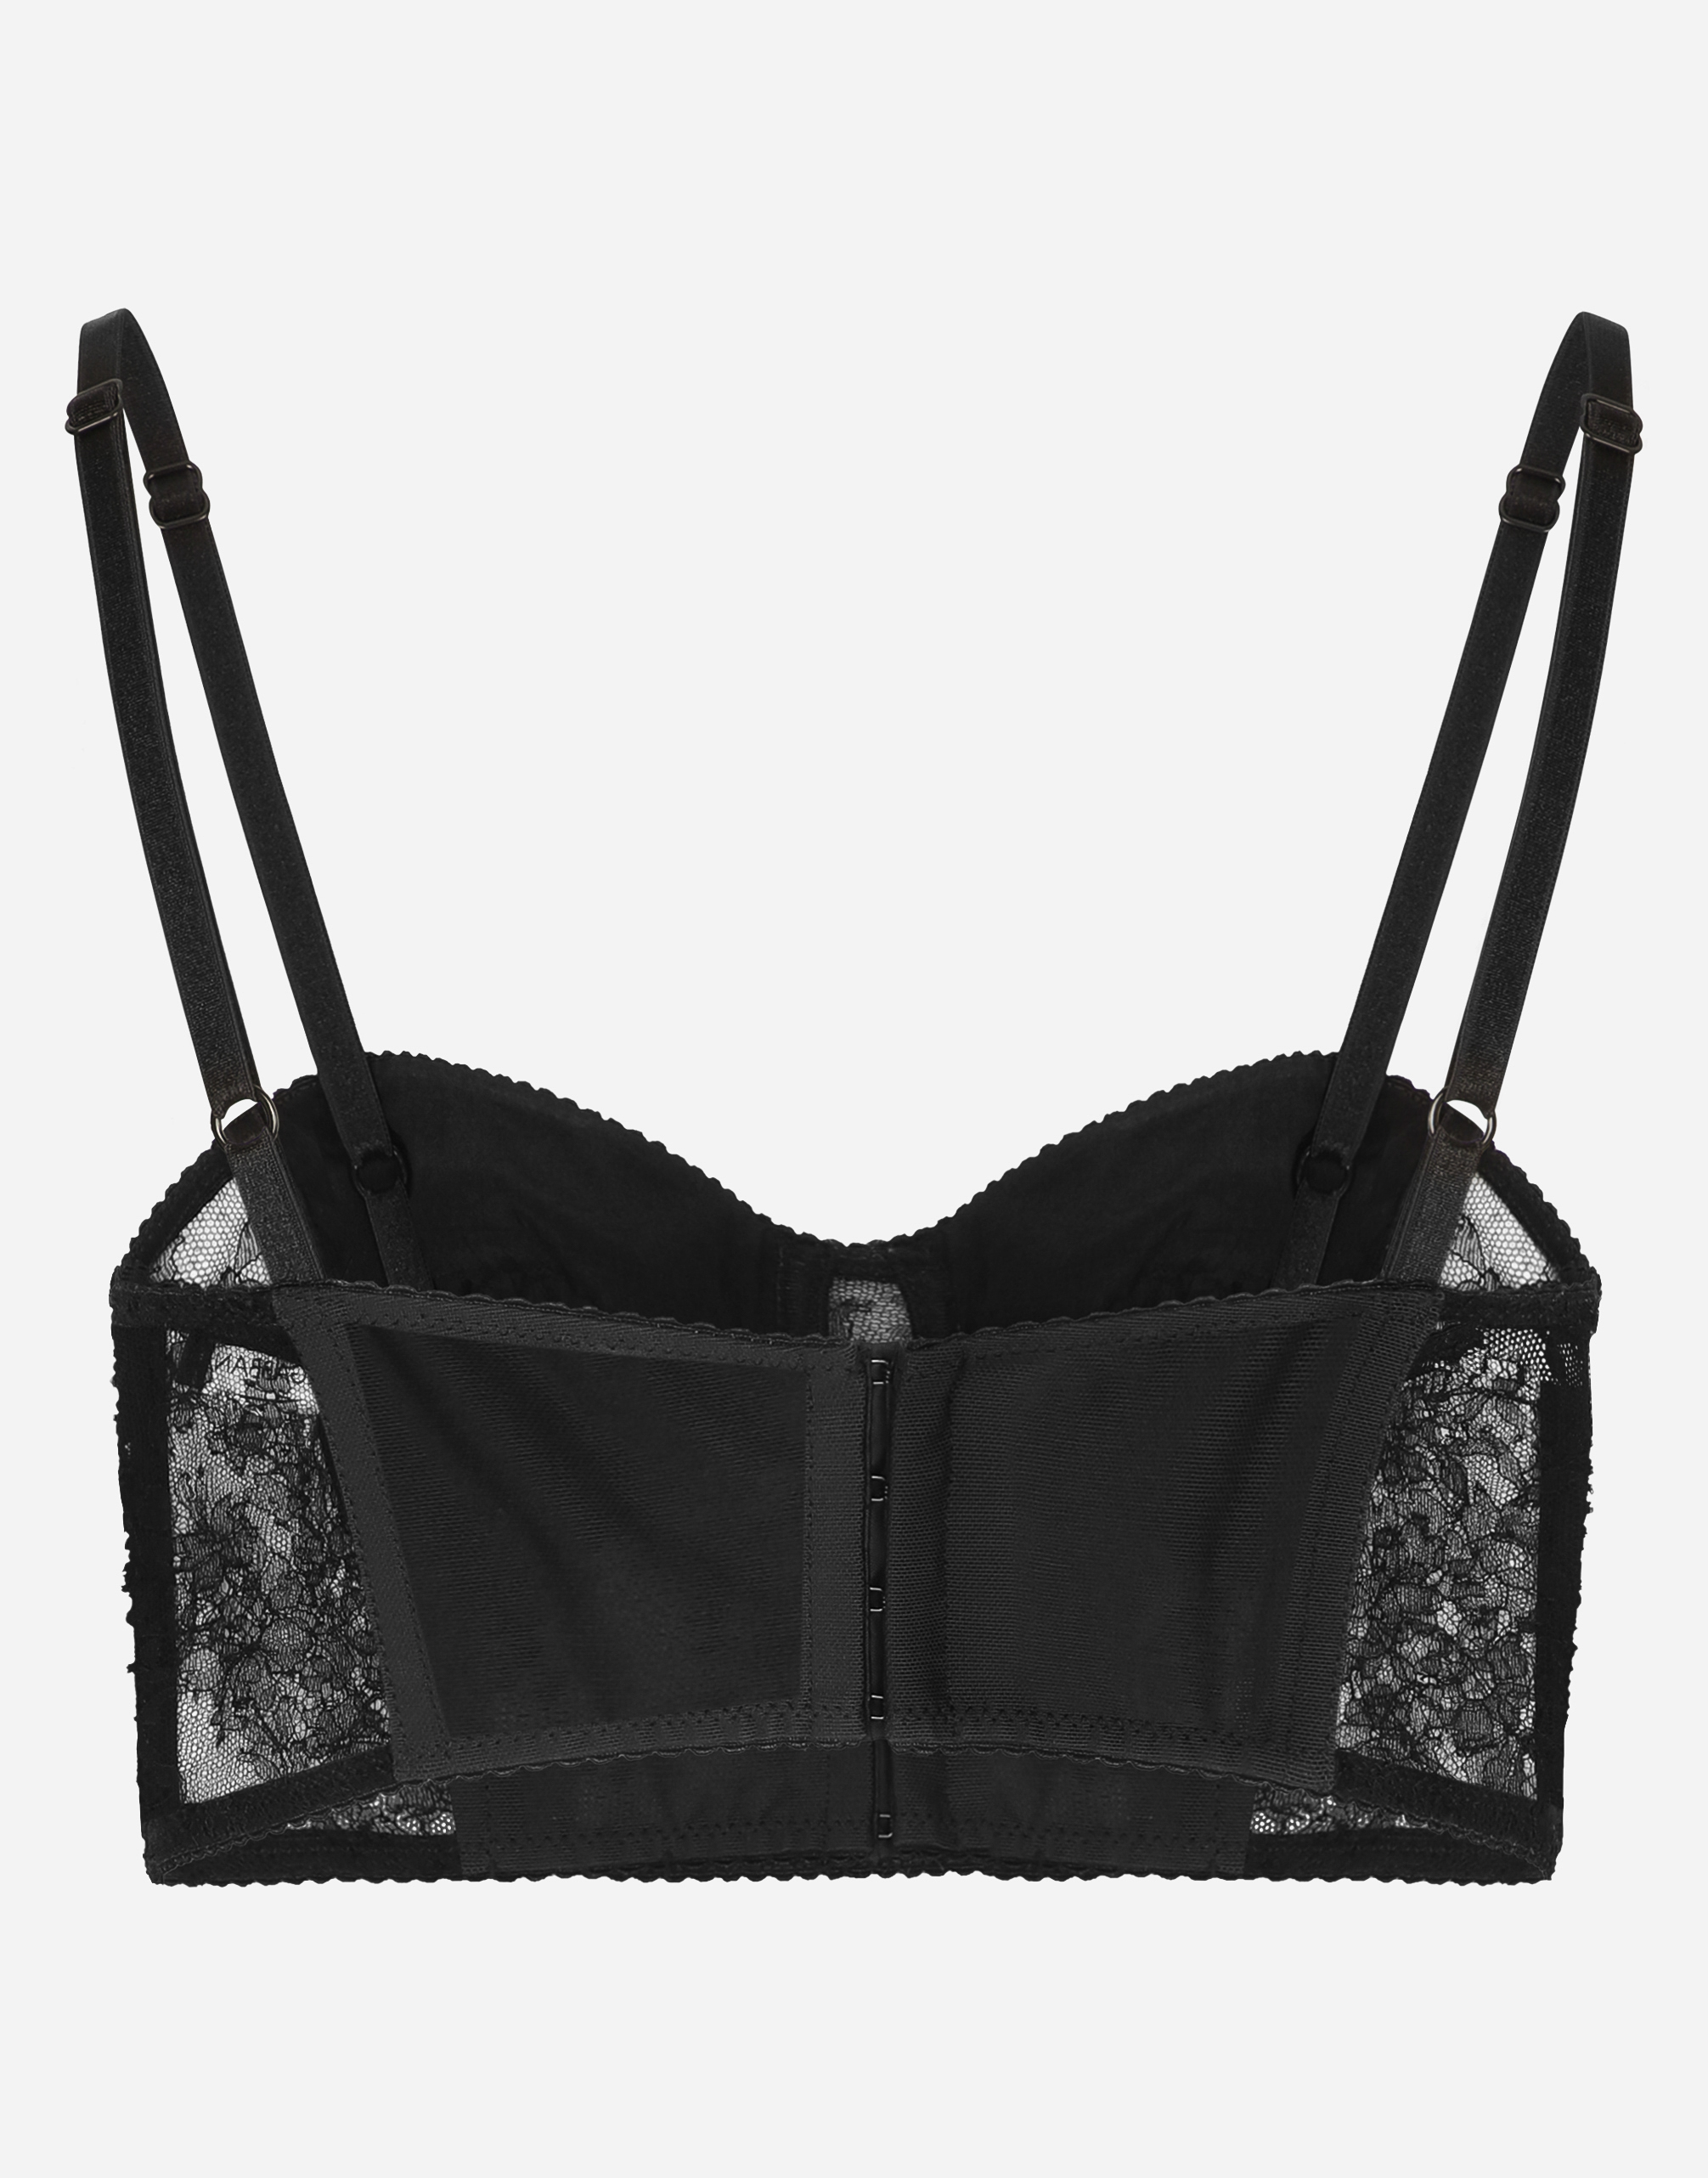 Lace balconette corset with straps in Black | Dolce&Gabbana®